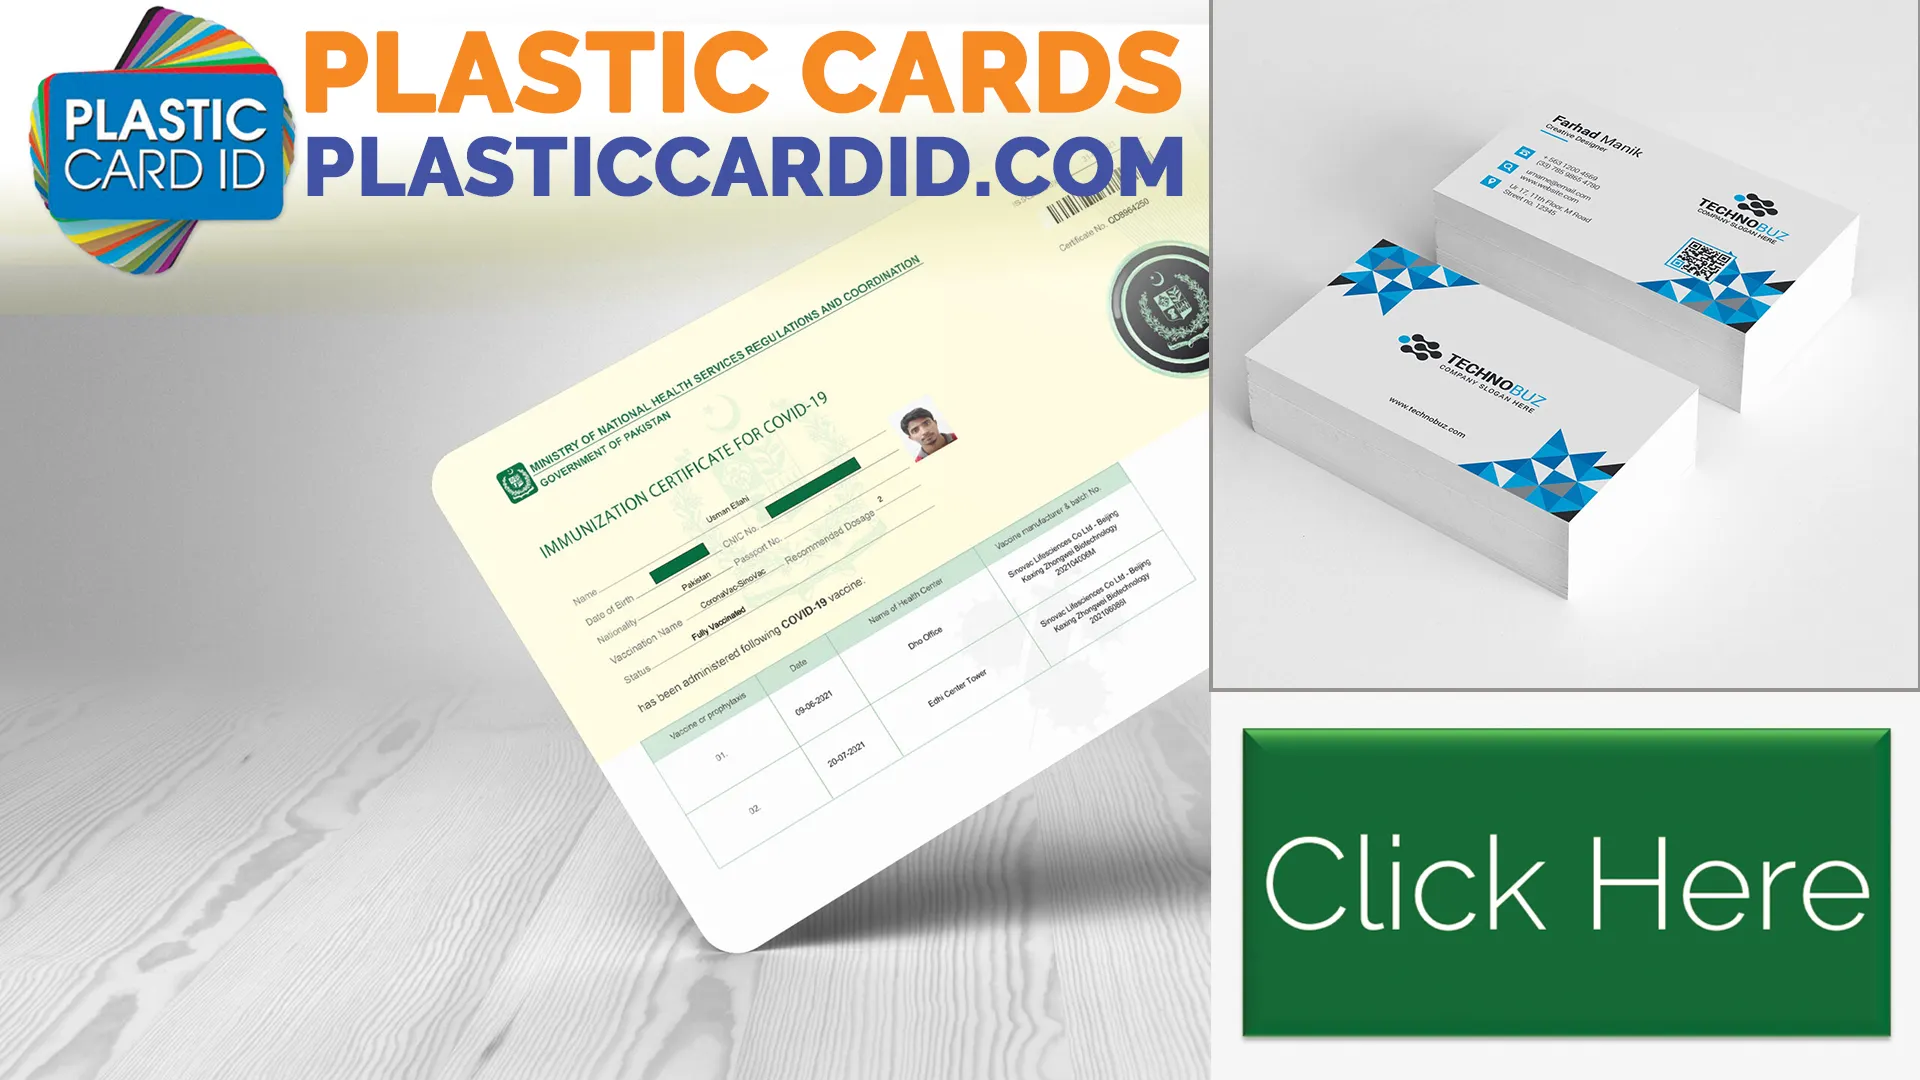 Discover Cutting-Edge Plastic Card Design Software with Plastic Card ID




